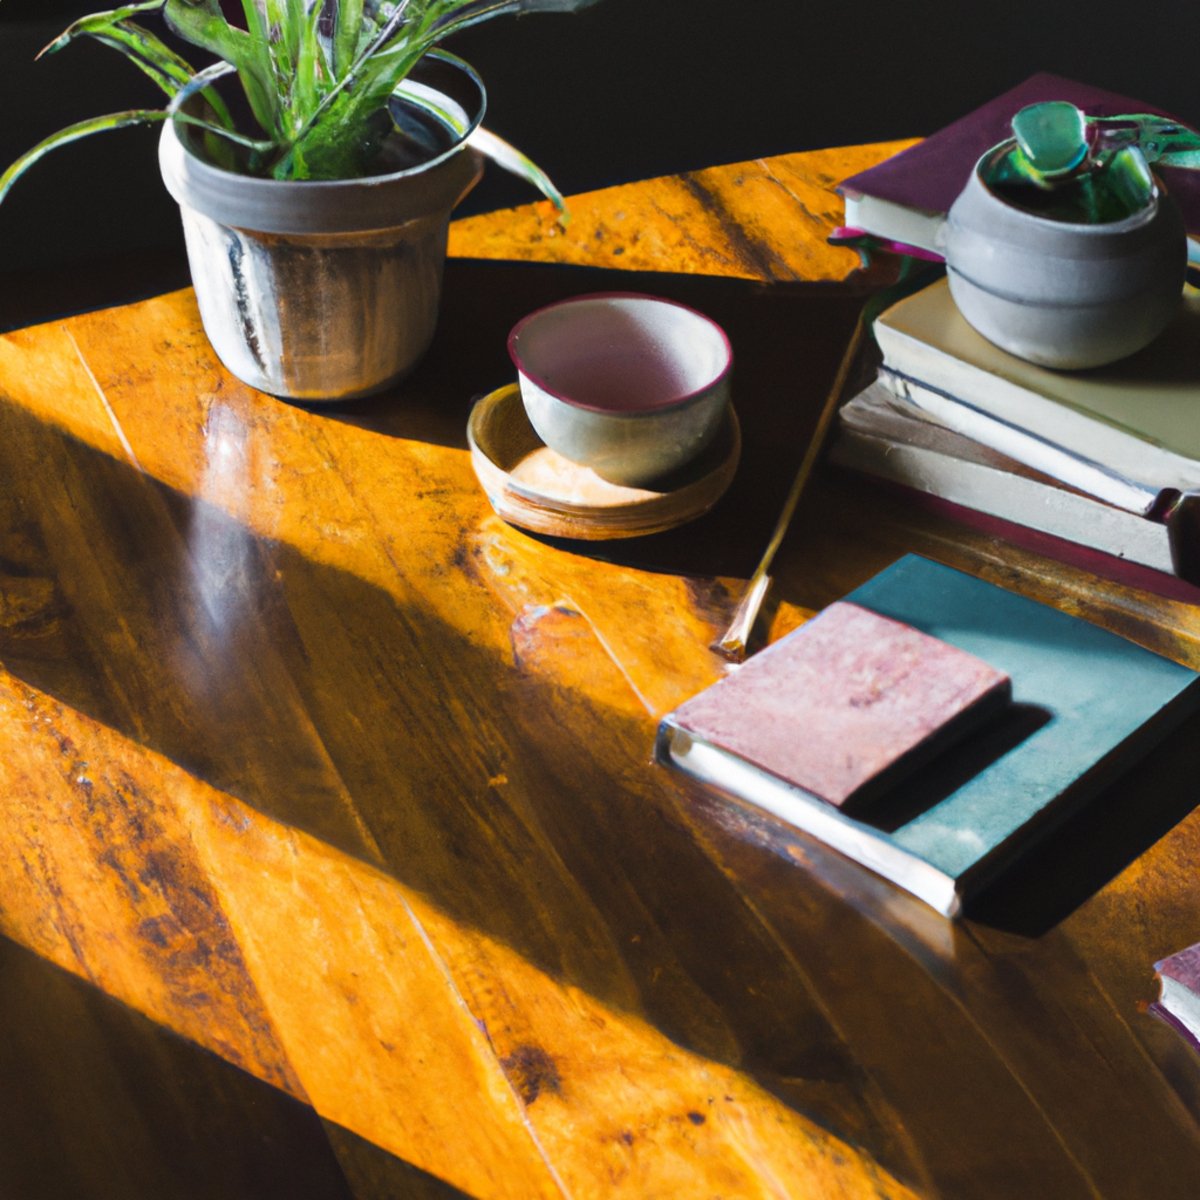 A serene wooden table with a potted plant, books, tea, and a journal, creating a peaceful atmosphere of self-care and balance.